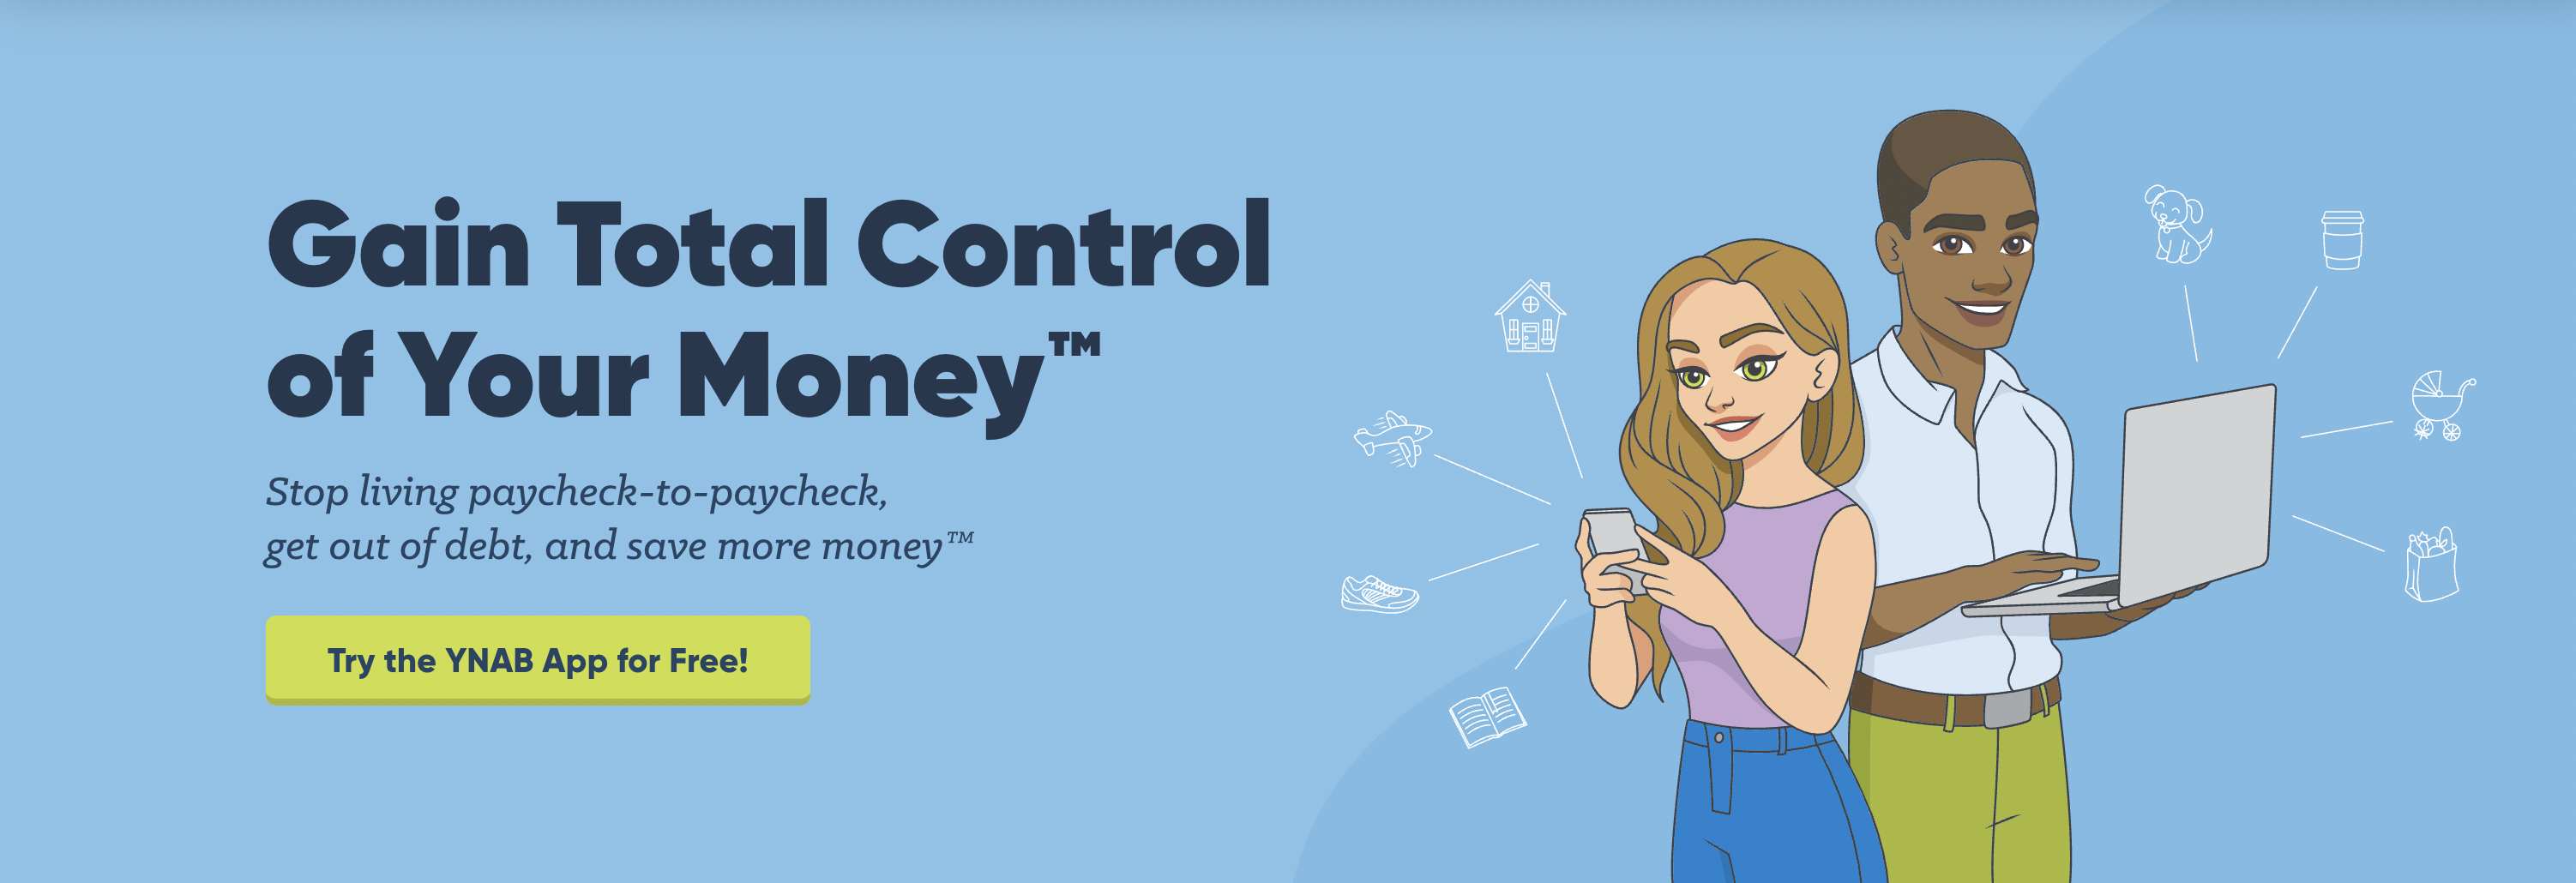 Gain total control of your money | Personal Finance